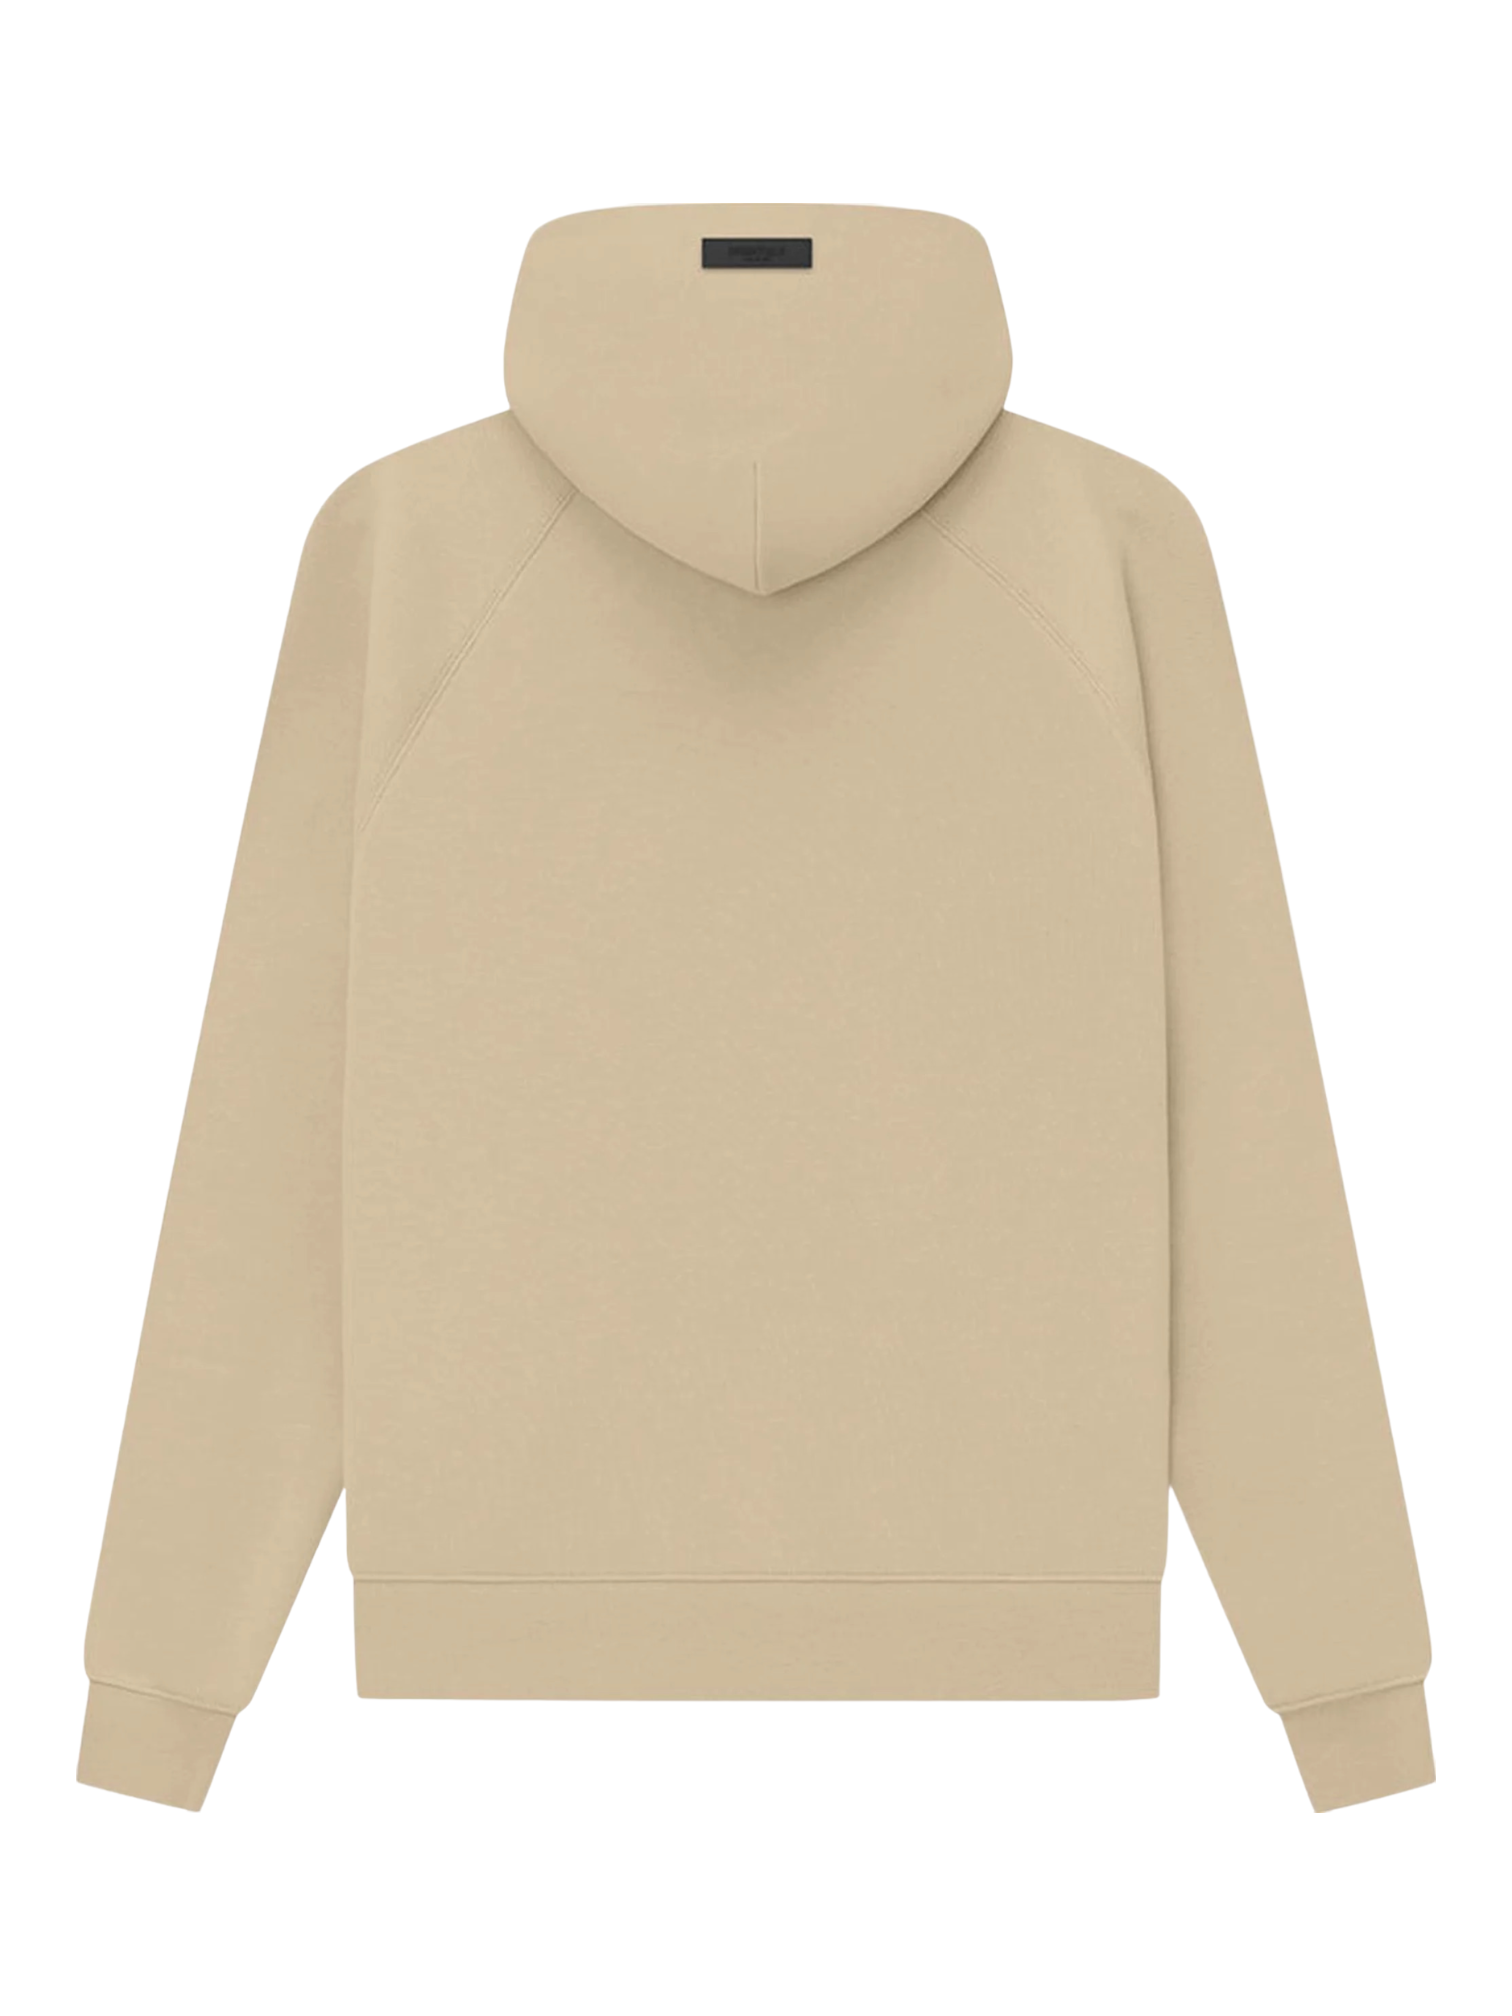 Essentials Fear of God Sand Fleece Hoodie SS23 — Genuine Design Luxury Consignment for Men. New & Pre-Owned Clothing, Shoes, & Accessories. Calgary, Canada